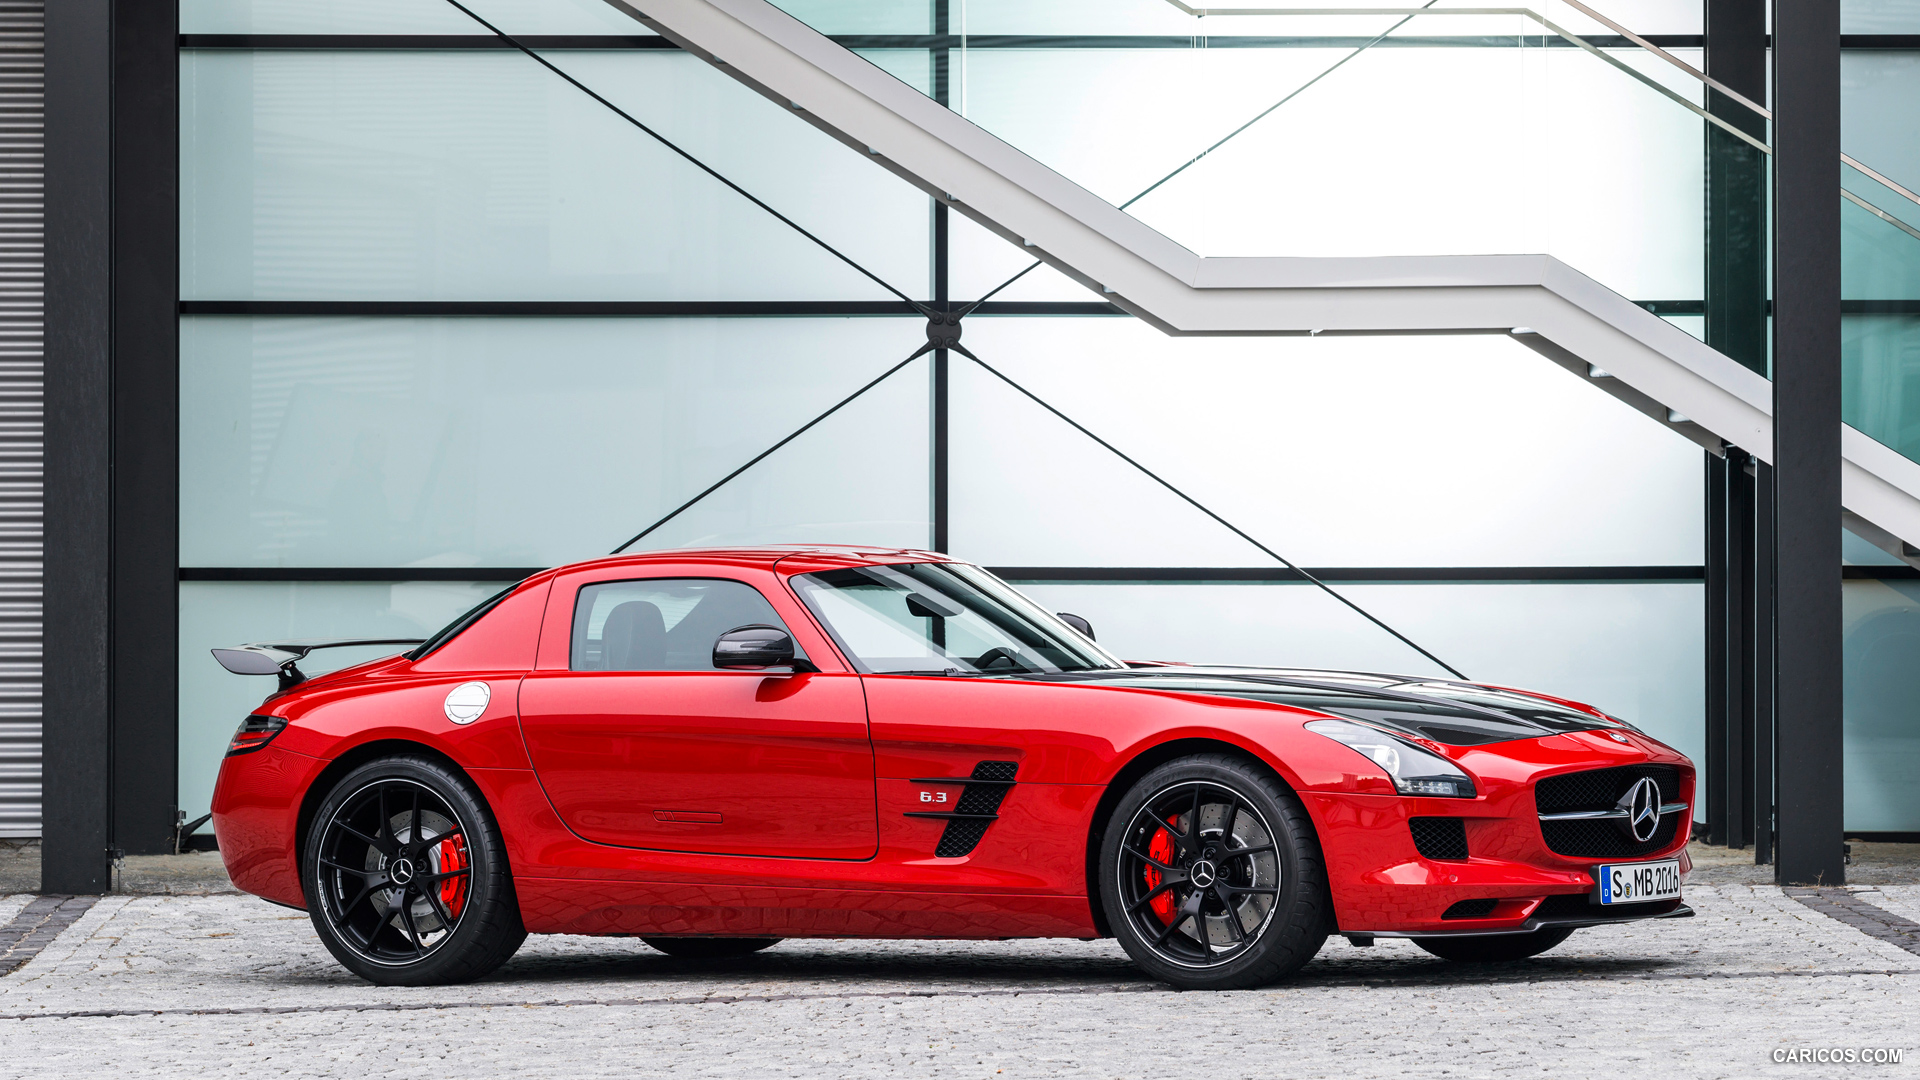  2015 Mercedes-Benz SLS AMG GT Coupe Final Edition - Side, #8 of 41